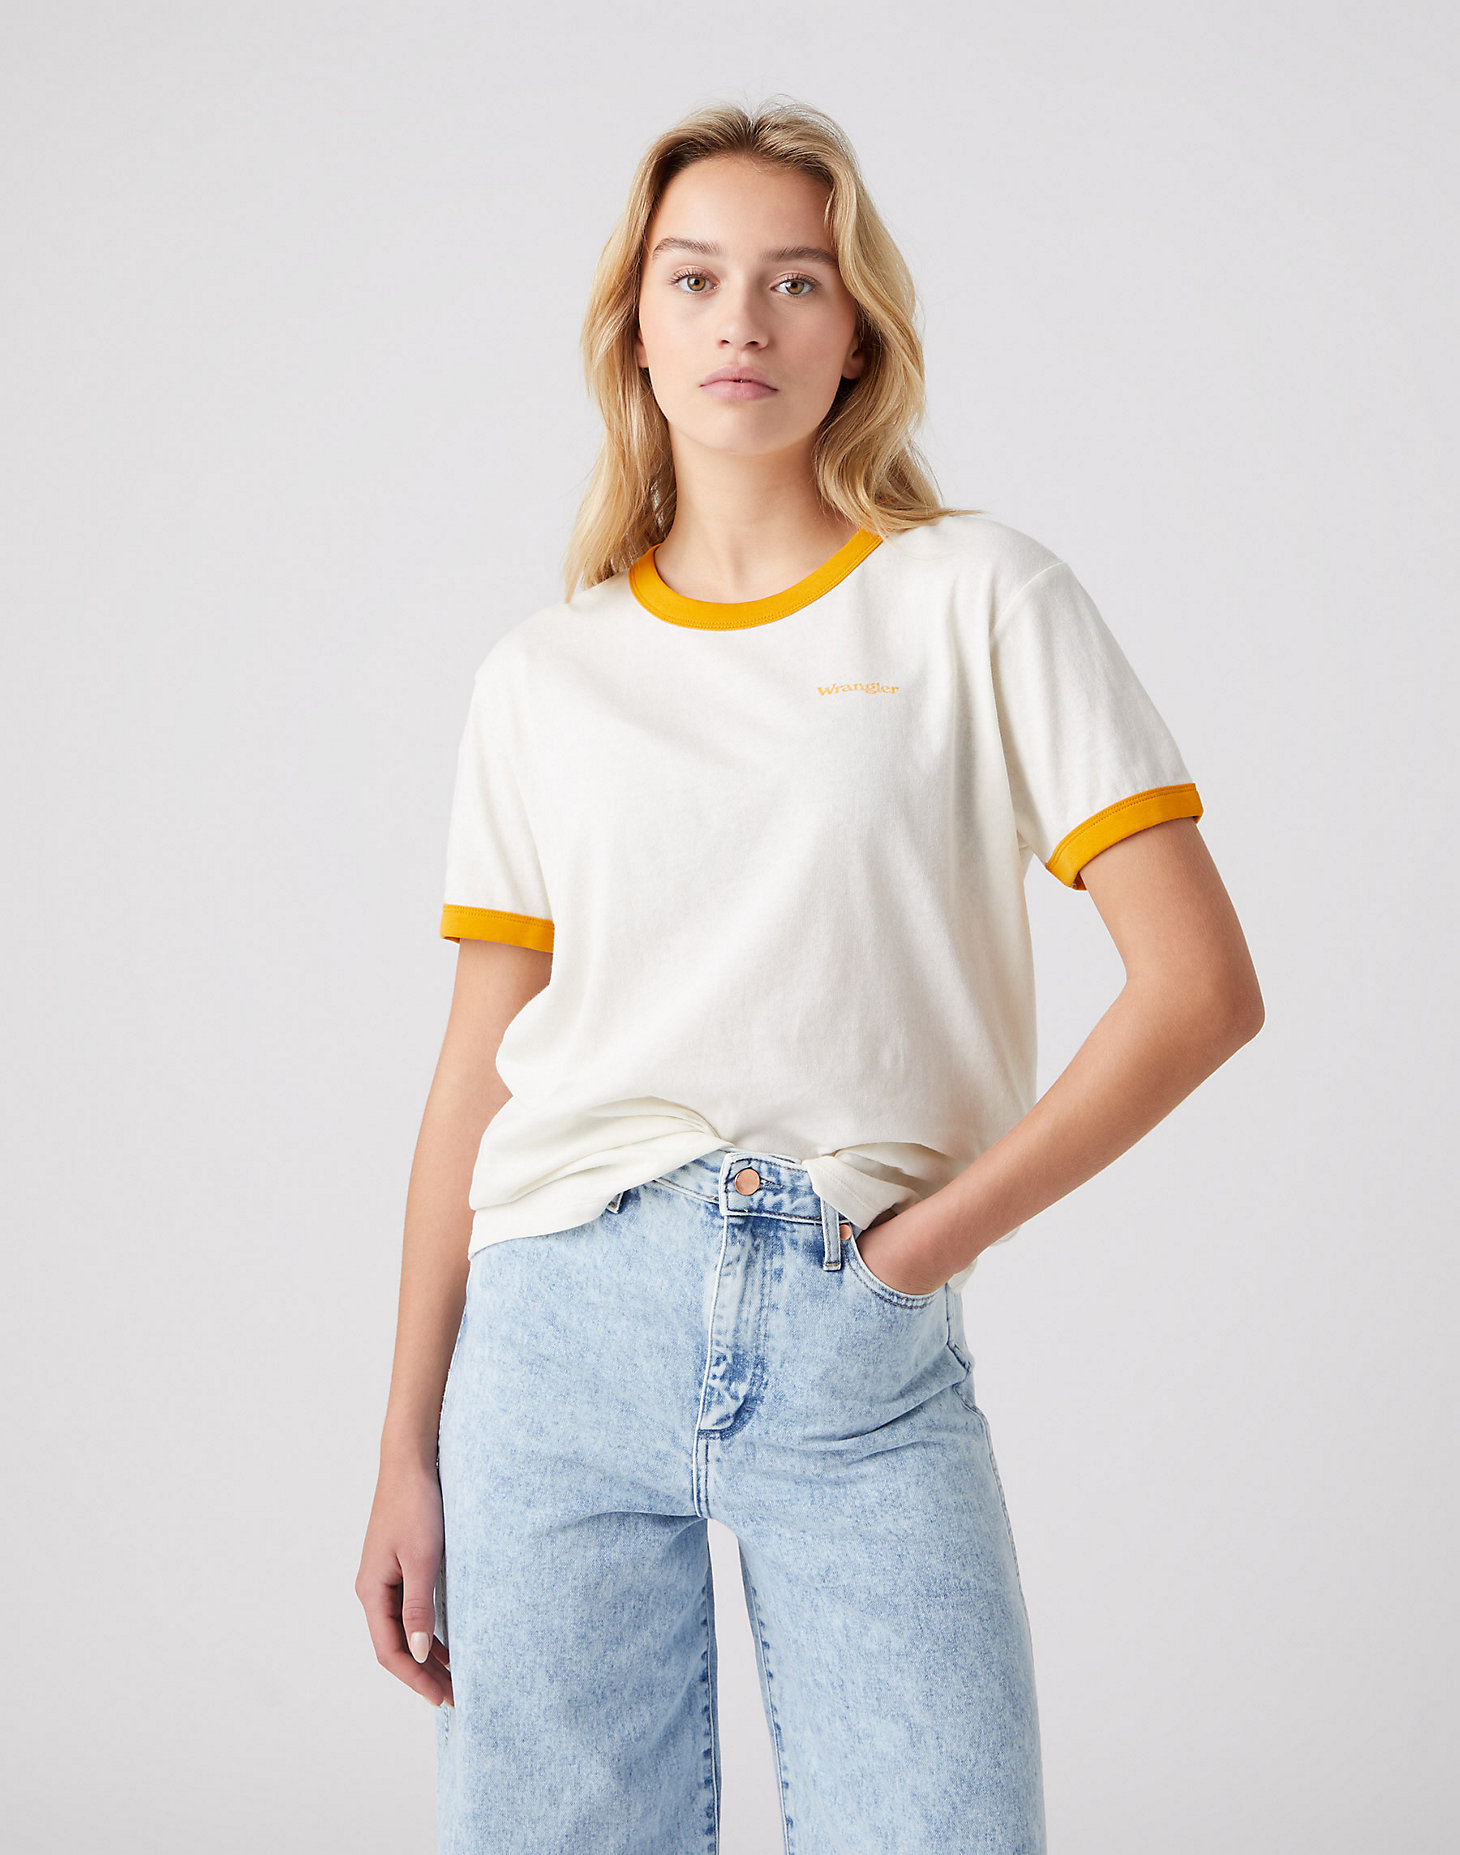 Relaxed Ringer Tee in Vanilla Ice alternative view 1